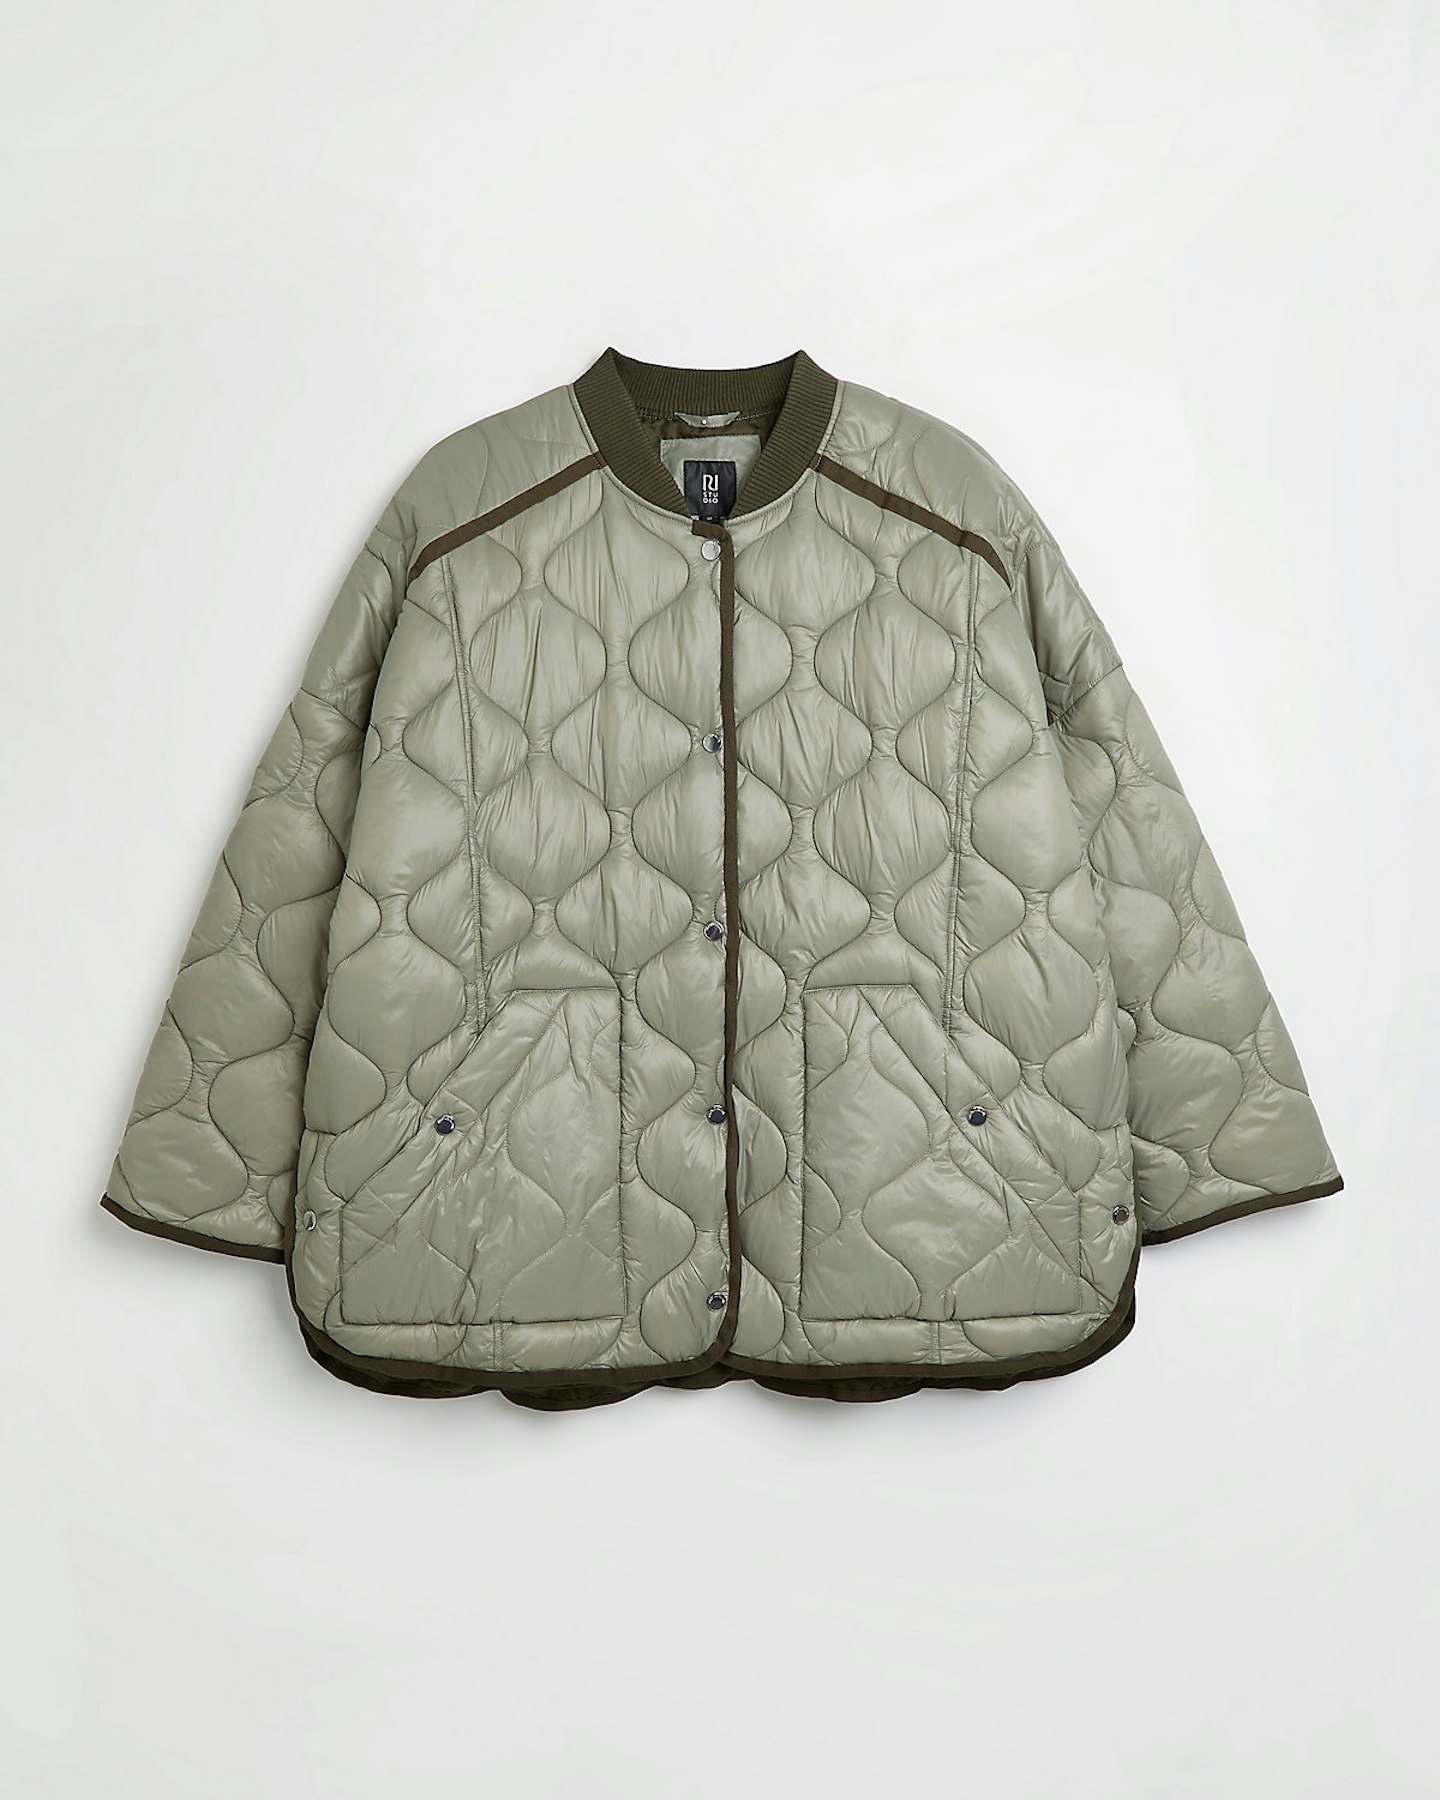 River Island, RI Studio Quilted Jacket, £95